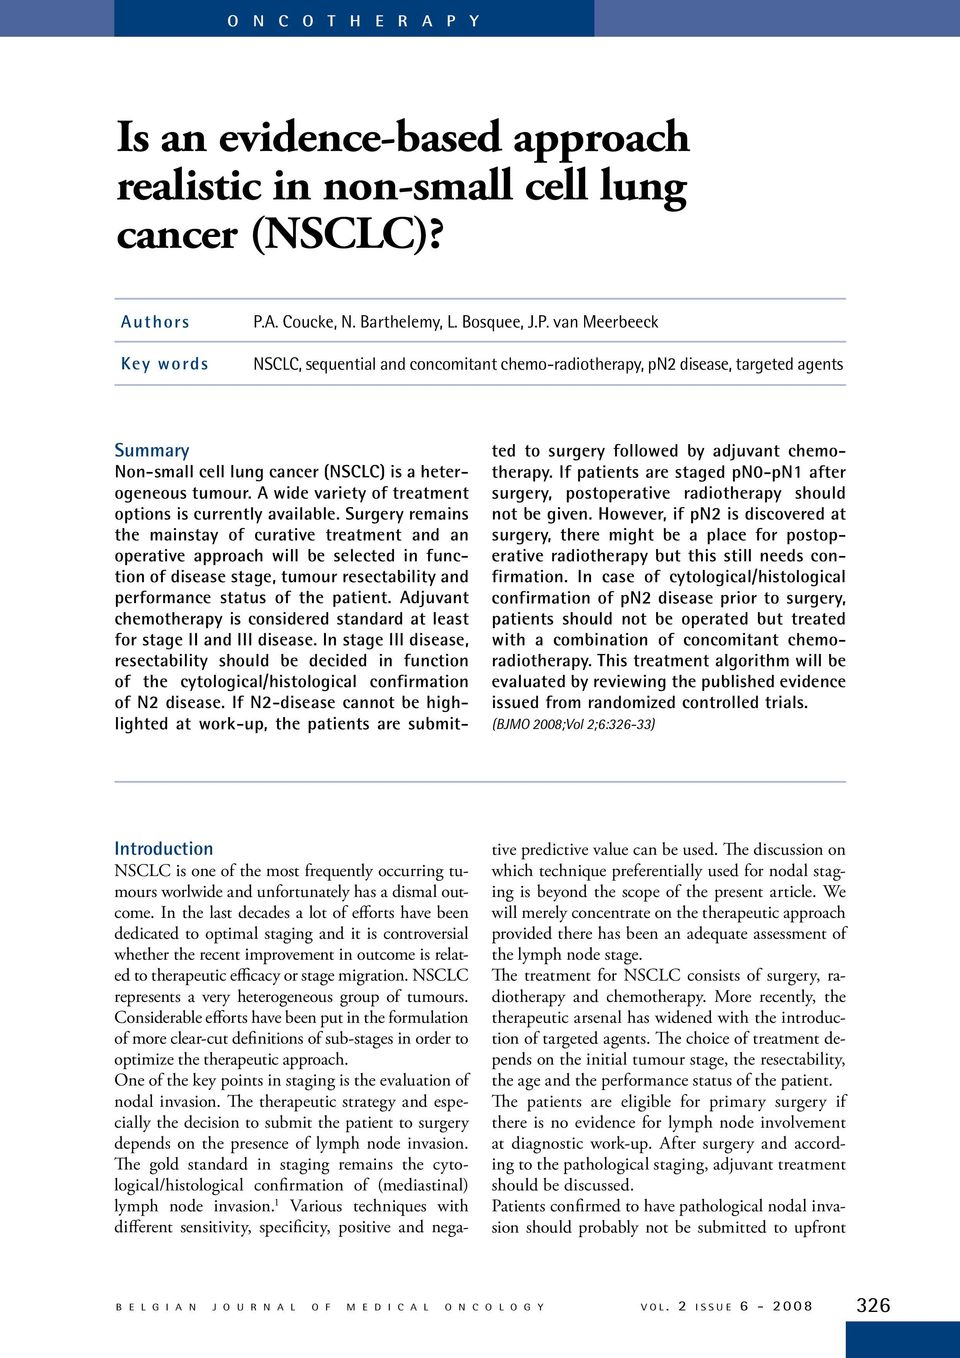 van Meerbeeck NSCLC, sequential and concomitant chemo-radiotherapy, pn2 disease, targeted agents Summary Non-small cell lung cancer (NSCLC) is a heterogeneous tumour.